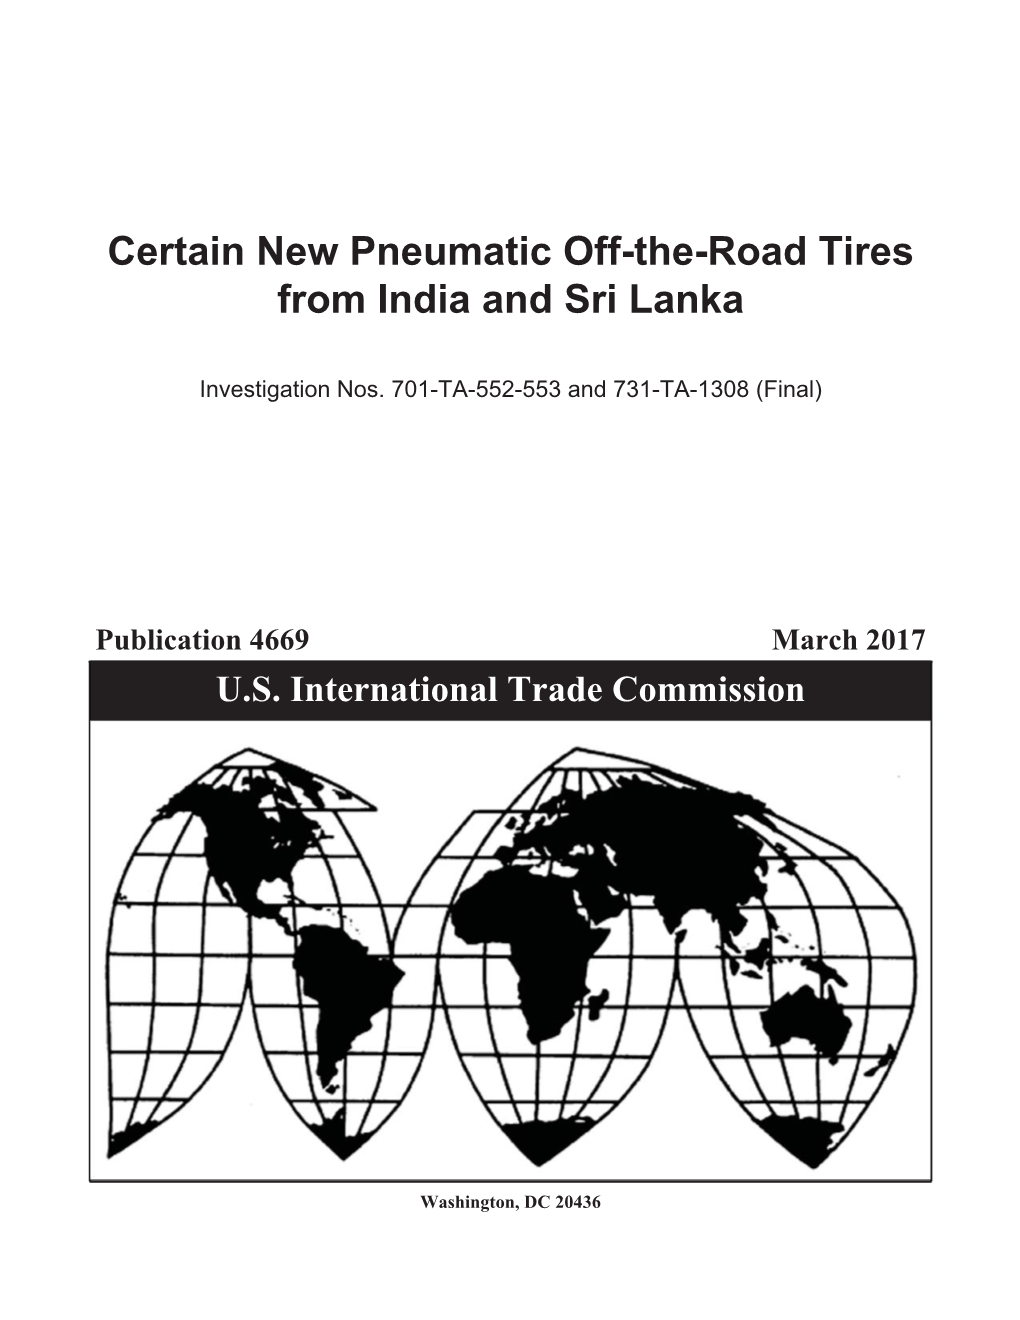 Certain New Pneumatic Off-The-Road Tires from India and Sri Lanka